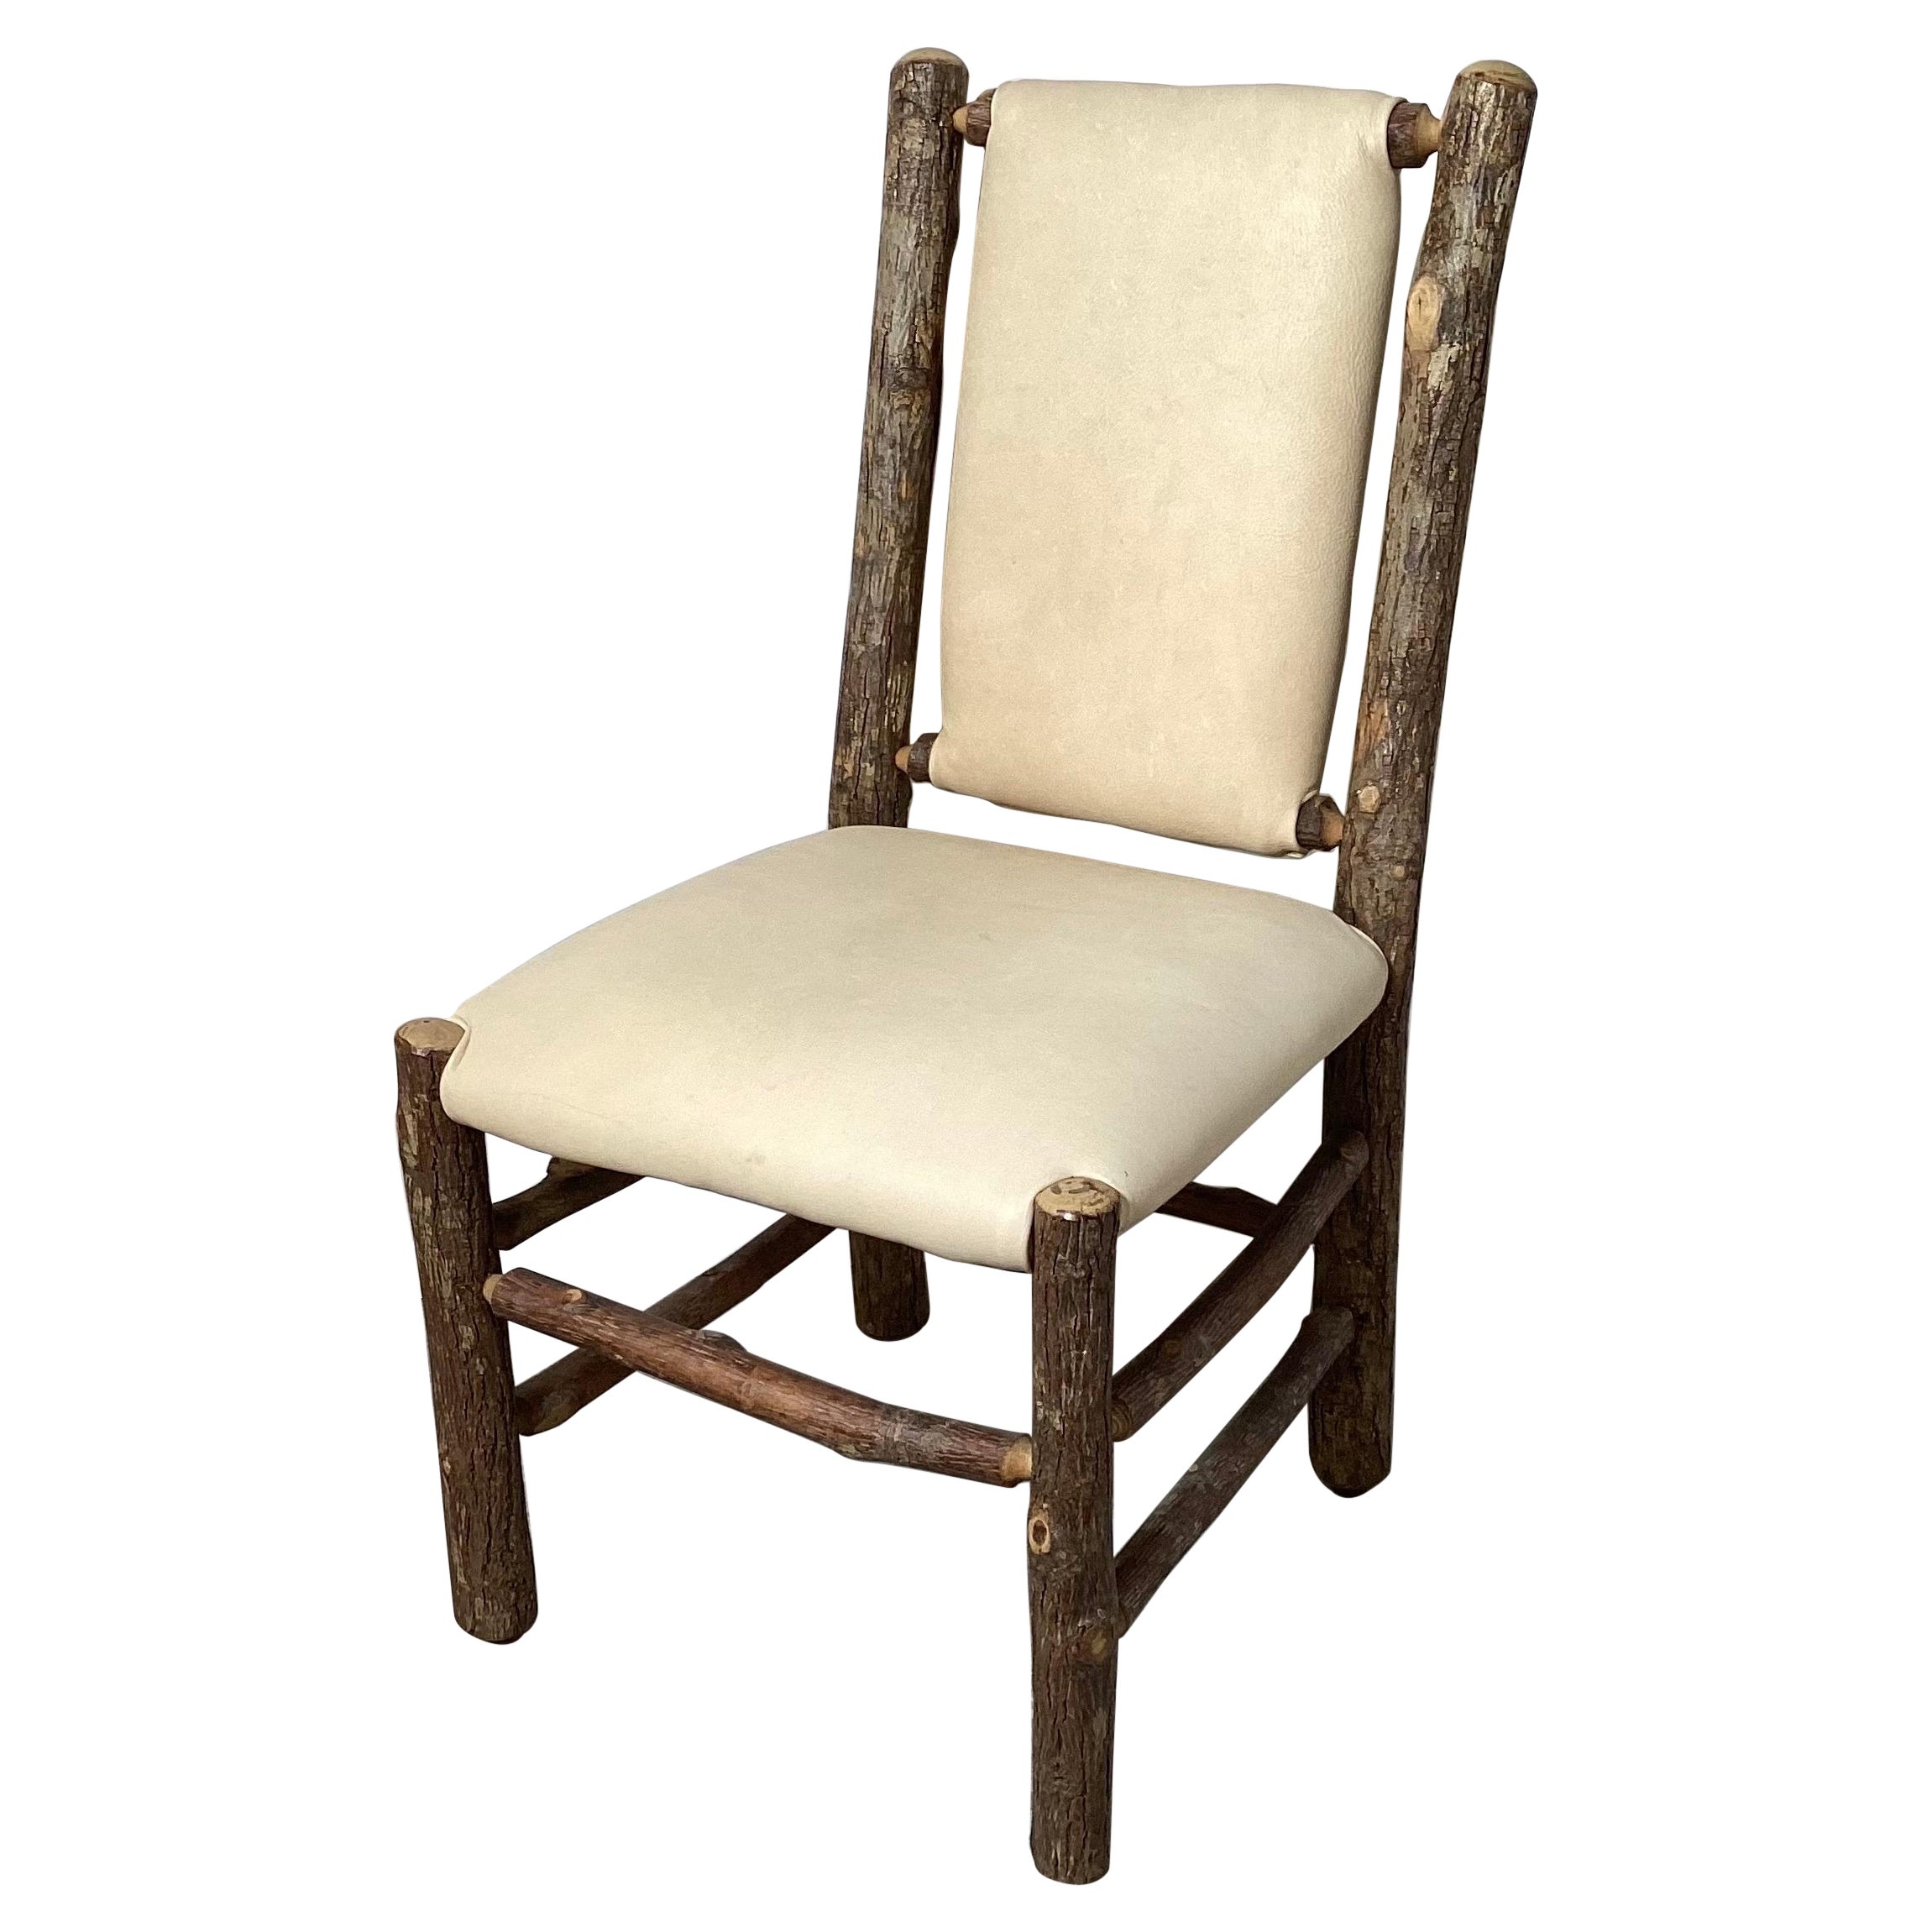 Old Hickory Accent Chair With Deer Skin Covering For Sale